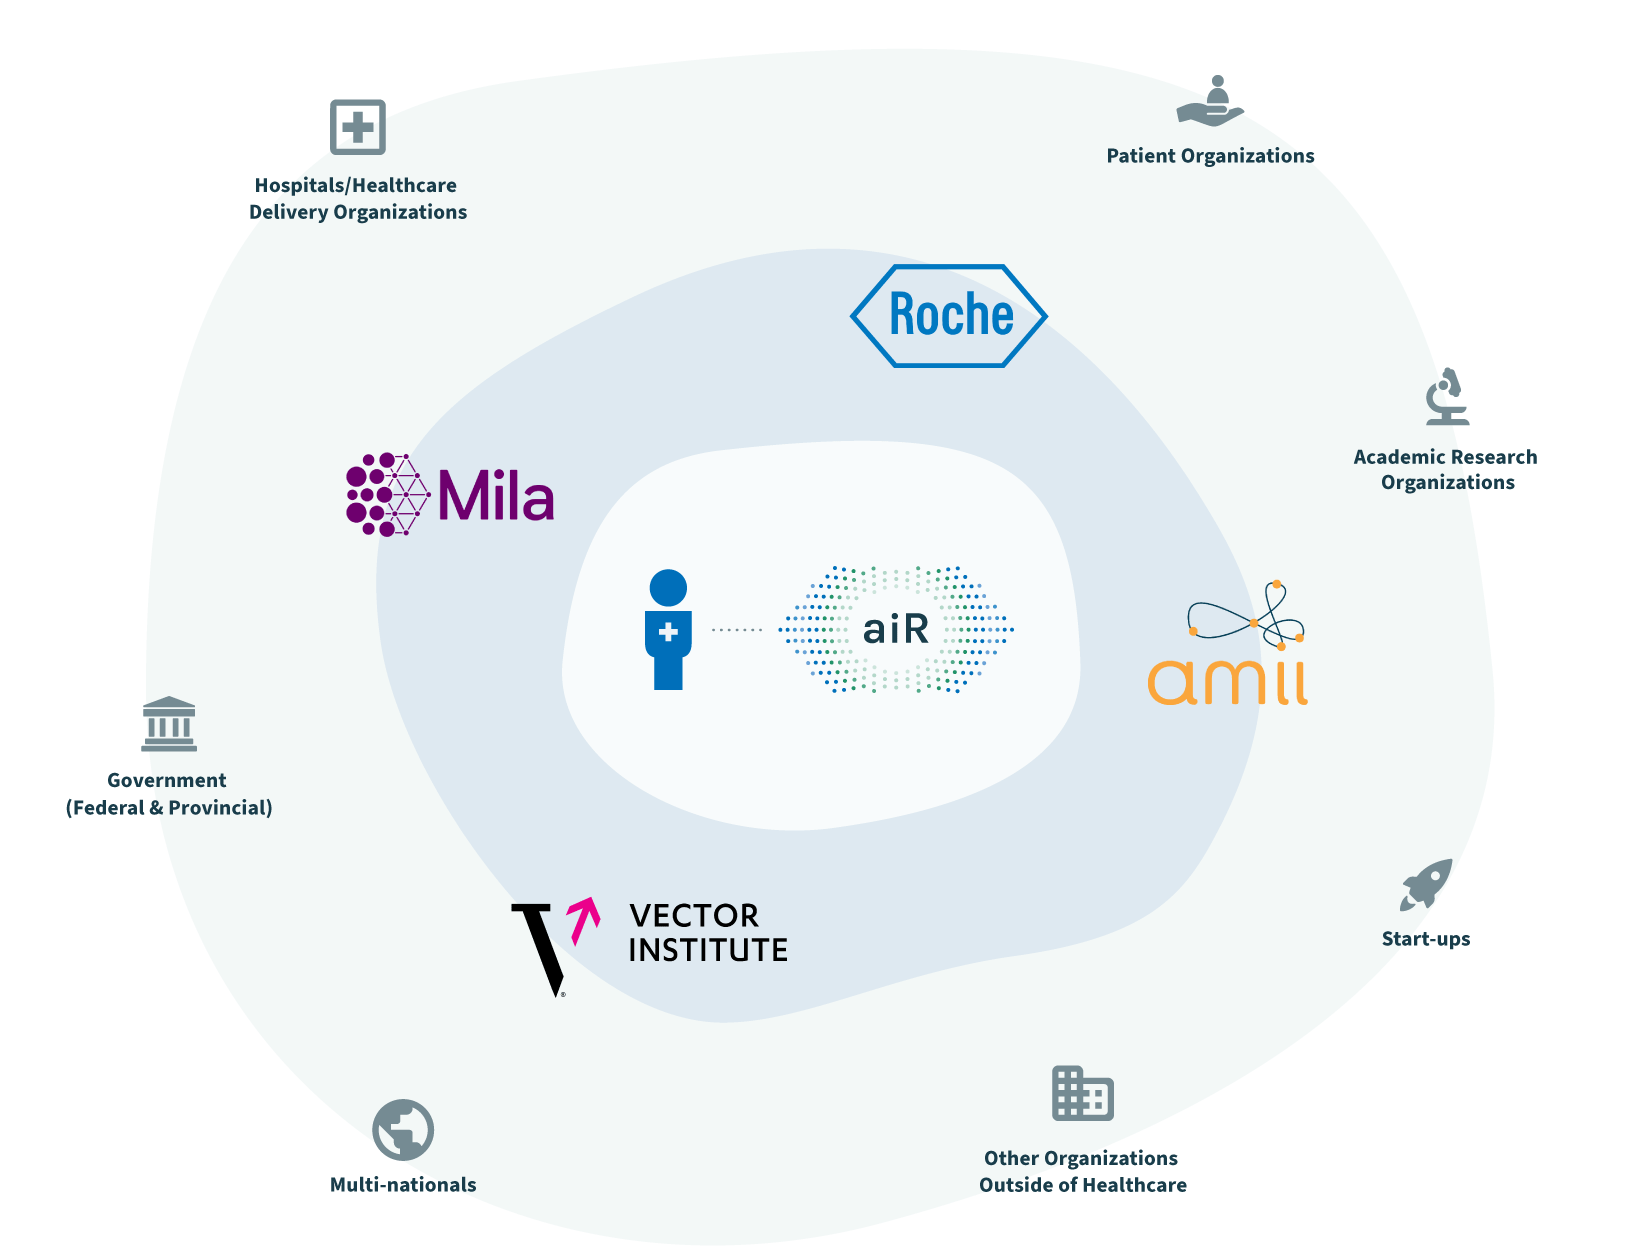 A diagram showing all the different organizations in the AIR community: AIR, Roche, Amii, Mila, Vector Institute, Hospital/Healthcare Delivery Organizations, Patient Organizations, Academic Research Organizations, Government, Start-ups, Multi-nationals, and other organizations outside of healthcare